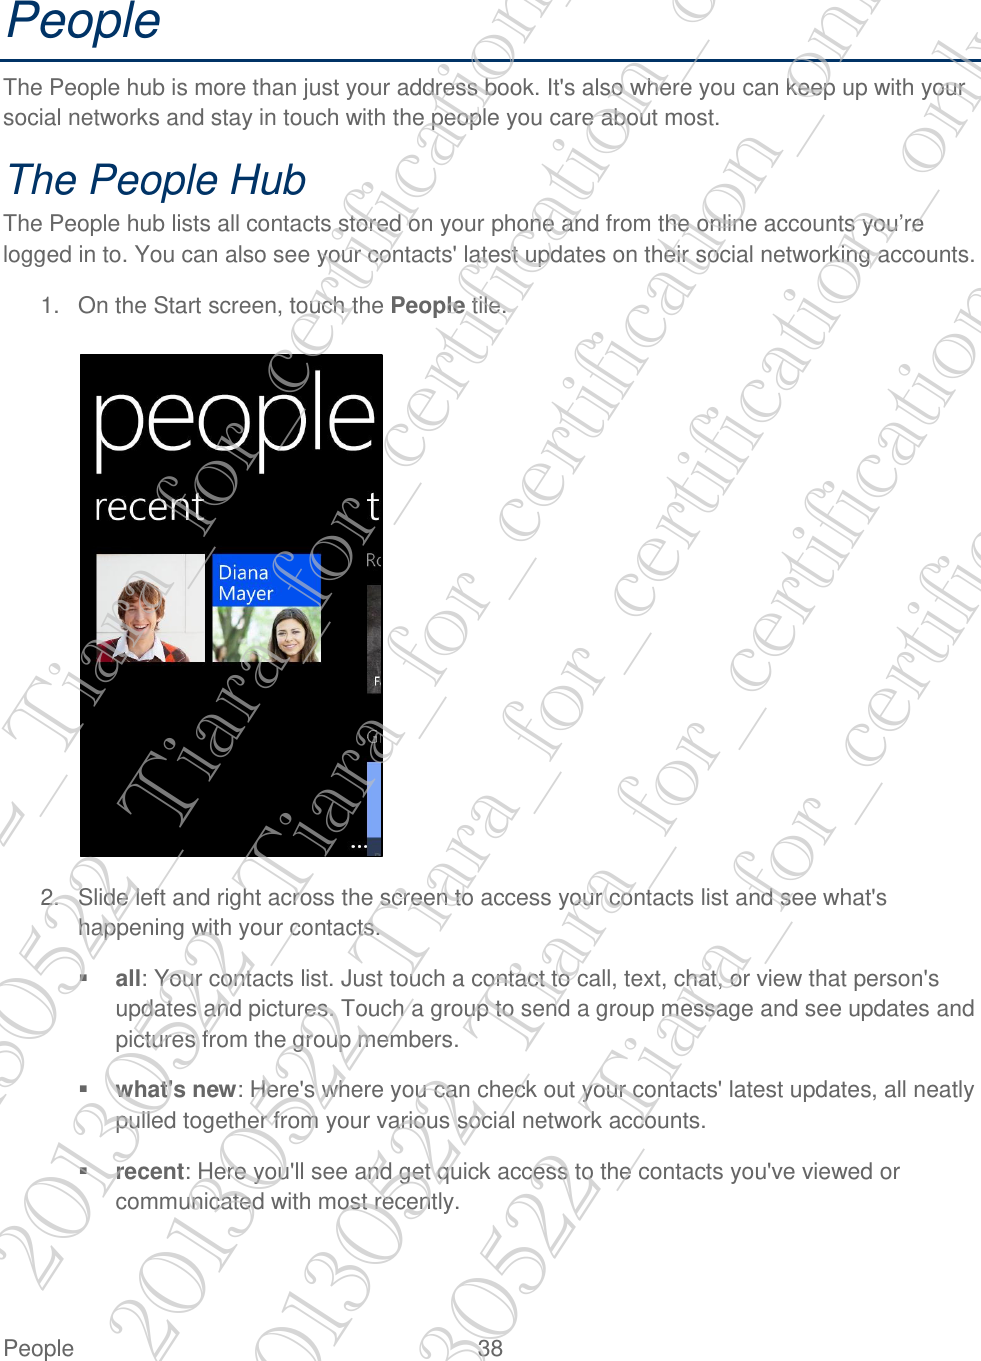  People  38   People The People hub is more than just your address book. It&apos;s also where you can keep up with your social networks and stay in touch with the people you care about most. The People Hub The People hub lists all contacts stored on your phone and from the online accounts you’re logged in to. You can also see your contacts&apos; latest updates on their social networking accounts. 1.  On the Start screen, touch the People tile.   2.  Slide left and right across the screen to access your contacts list and see what&apos;s happening with your contacts.  all: Your contacts list. Just touch a contact to call, text, chat, or view that person&apos;s updates and pictures. Touch a group to send a group message and see updates and pictures from the group members.  what&apos;s new: Here&apos;s where you can check out your contacts&apos; latest updates, all neatly pulled together from your various social network accounts.  recent: Here you&apos;ll see and get quick access to the contacts you&apos;ve viewed or communicated with most recently. 20130522_Tiara_for_certification_only 20130522_Tiara_for_certification_only 20130522_Tiara_for_certification_only 20130522_Tiara_for_certification_only 20130522_Tiara_for_certification_only 20130522_Tiara_for_certification_only